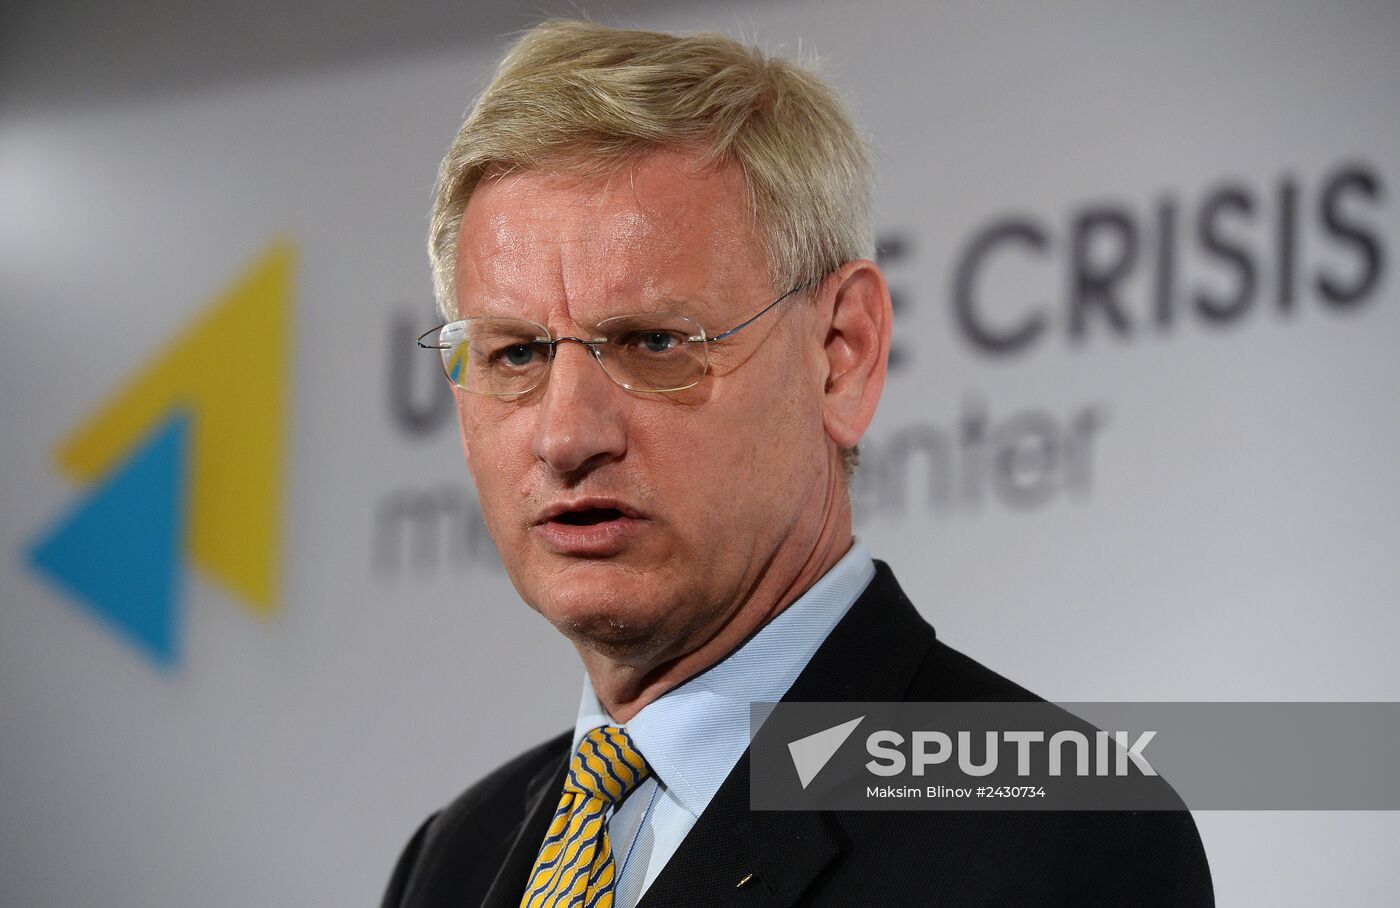 Swedish Foreign Minister Carl Bildt holds briefing in Kiev